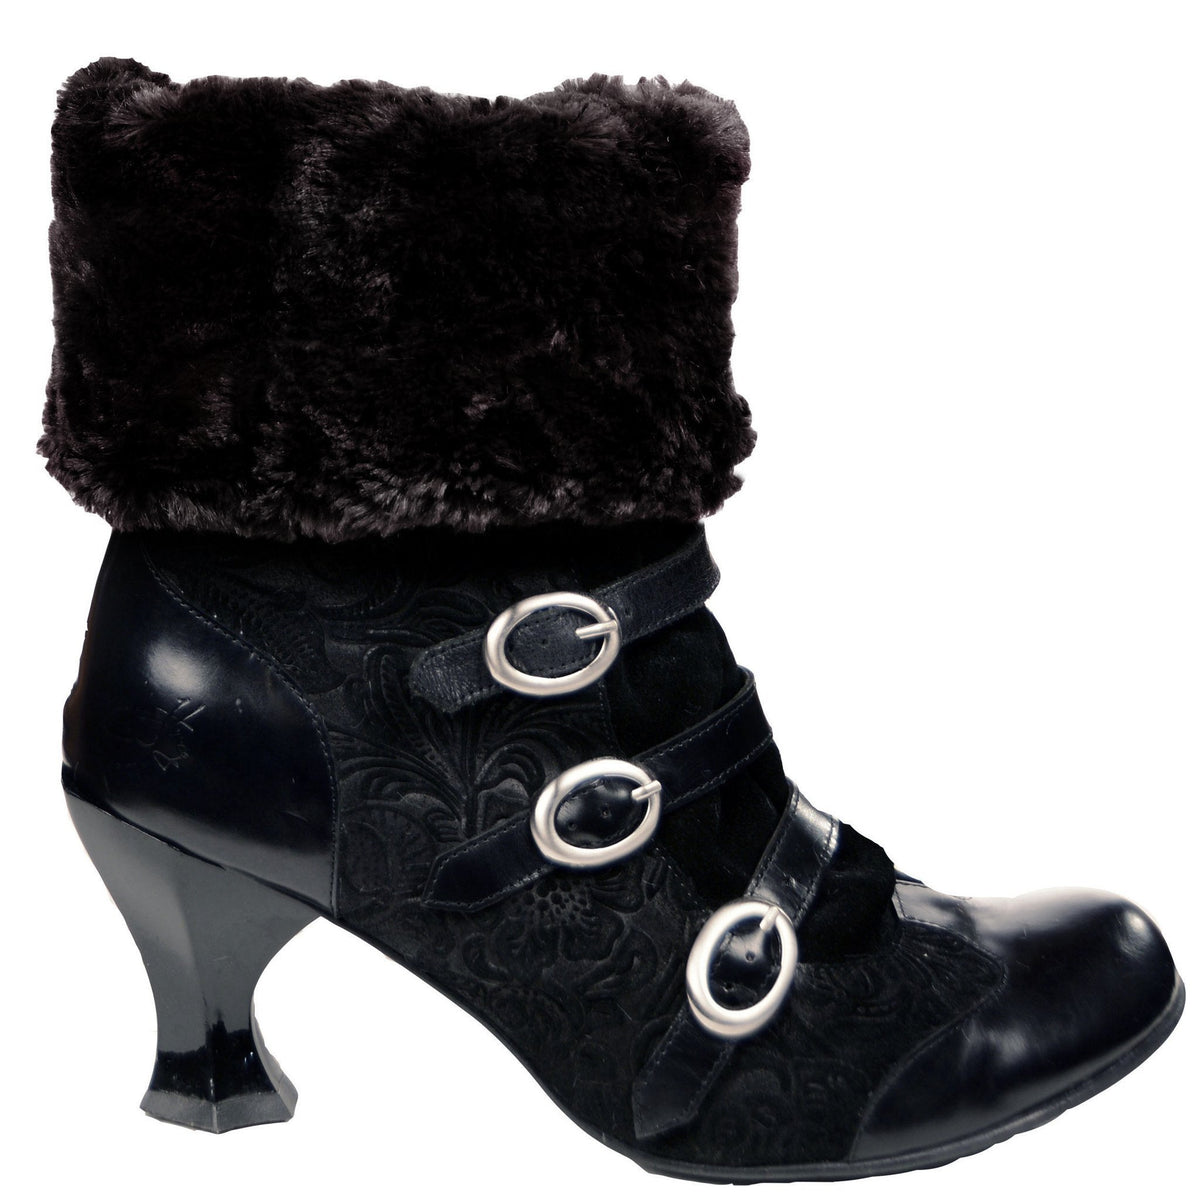 Boot Topper - Cuddly Faux Furs